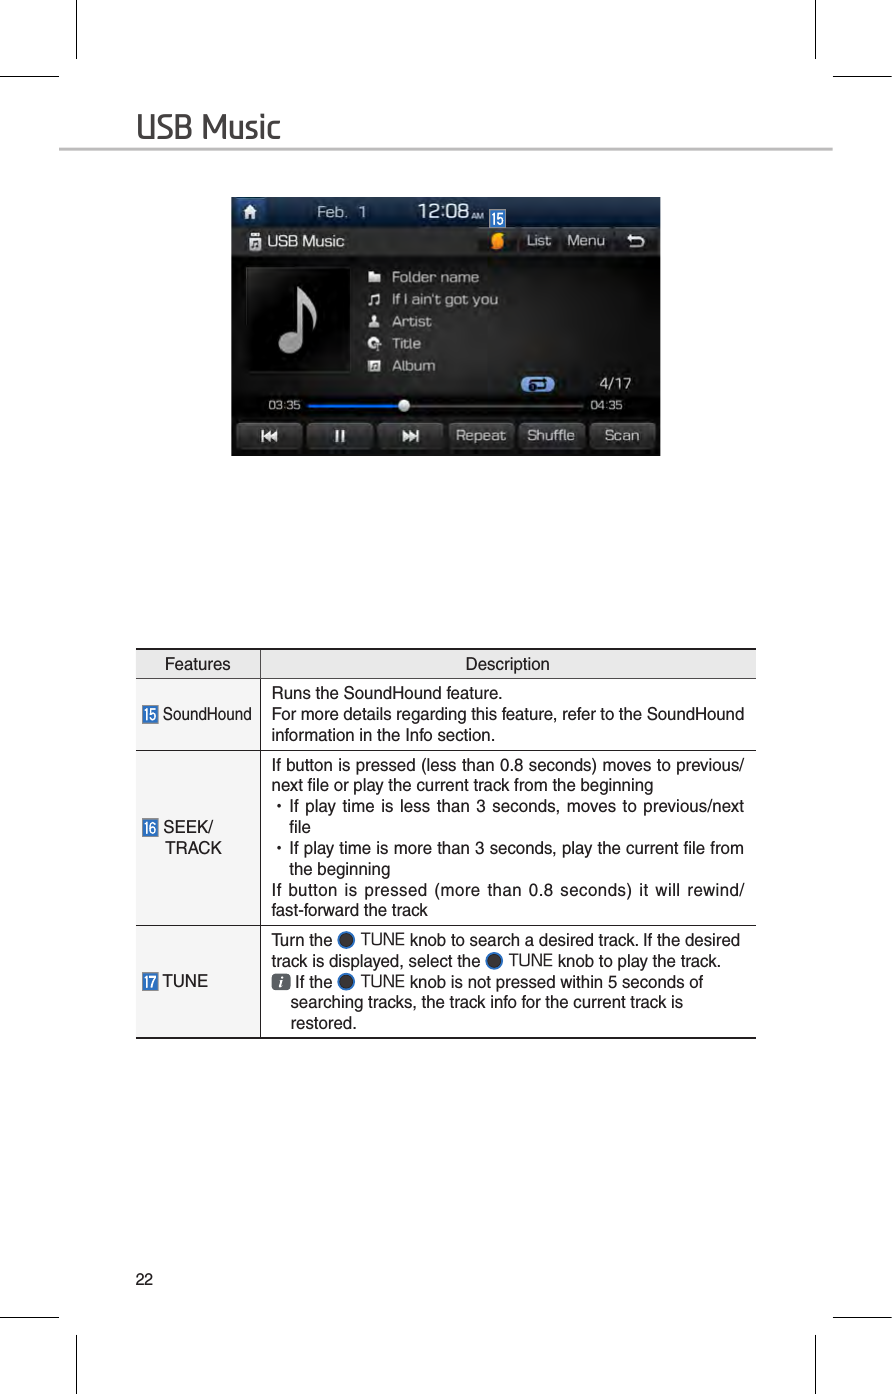 22Features Description SoundHoundRuns the SoundHound feature.For more details regarding this feature, refer to the SoundHound information in the Info section. SEEK/TRACKIf button is pressed (less than 0.8 seconds) moves to previous/next file or play the current track from the beginning  •If play time  is  less than 3 seconds, moves to previous/next file •If play time is more than 3 seconds, play the current file from the beginningIf  button is  pressed  (more than  0.8  seconds) it  will  rewind/fast-forward the track TUNETurn the   TUNE knob to search a desired track. If the desired track is displayed, select the   TUNE knob to play the track.  If the   TUNE knob is not pressed within 5 seconds of searching tracks, the track info for the current track is restored.USB Music